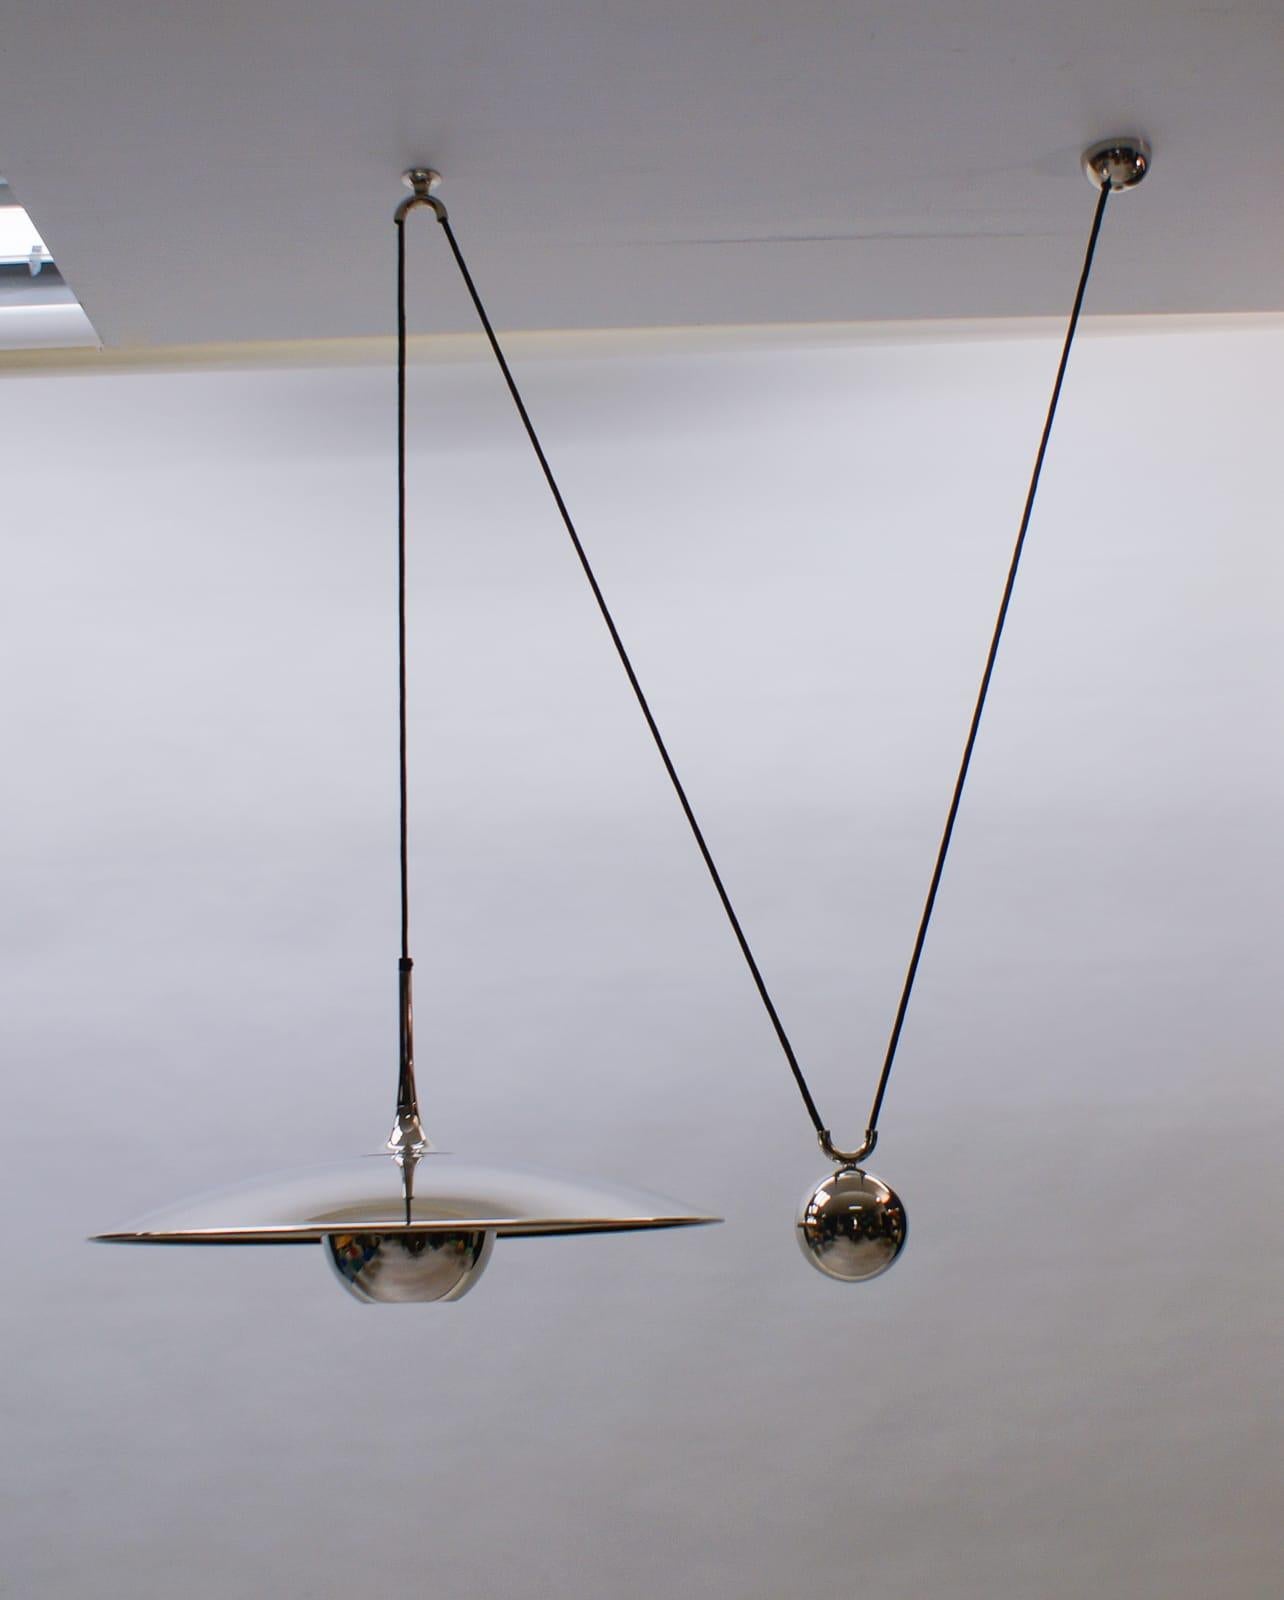 Plated Florian Schulz Onos Pendant with Counterweight, Germany, 1970s